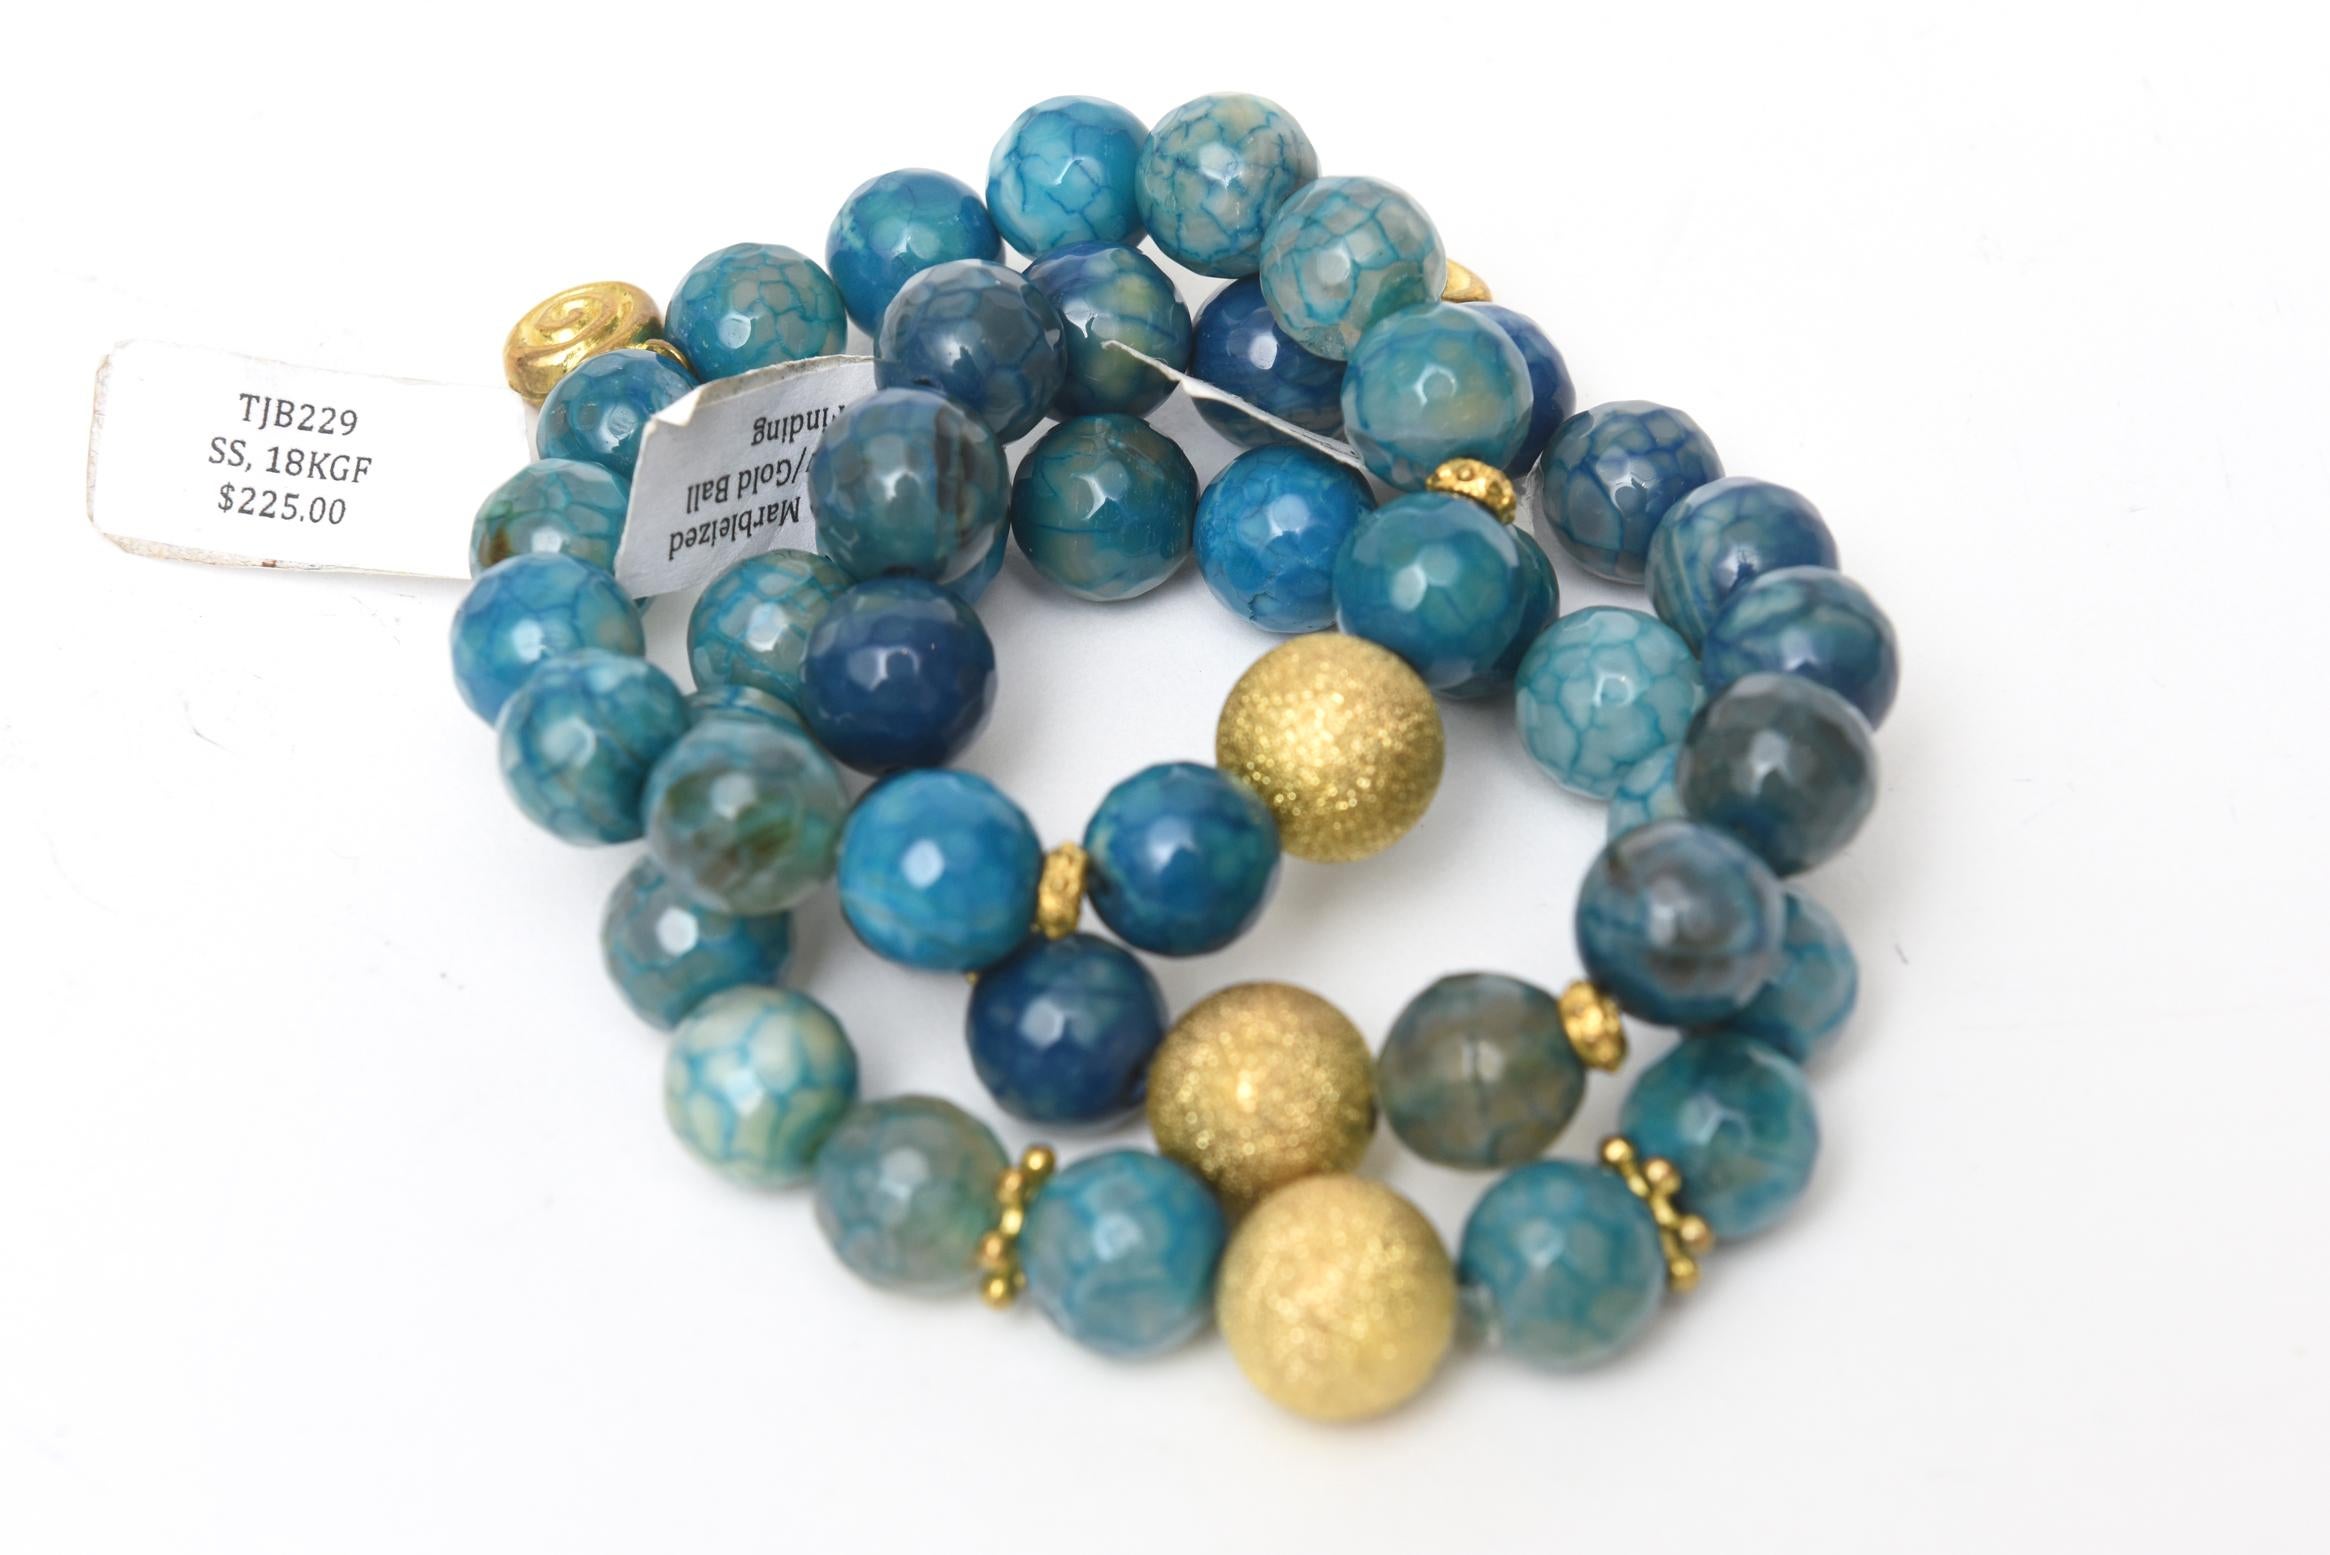 This trio of custom jeweler made stretch beaded bracelets are a combination of sky blue marbleized agate and blue lace agate mixed in with gold ball findings and other gold filled elements. They are a gorgeous hue of sapphire blue with hints of dark